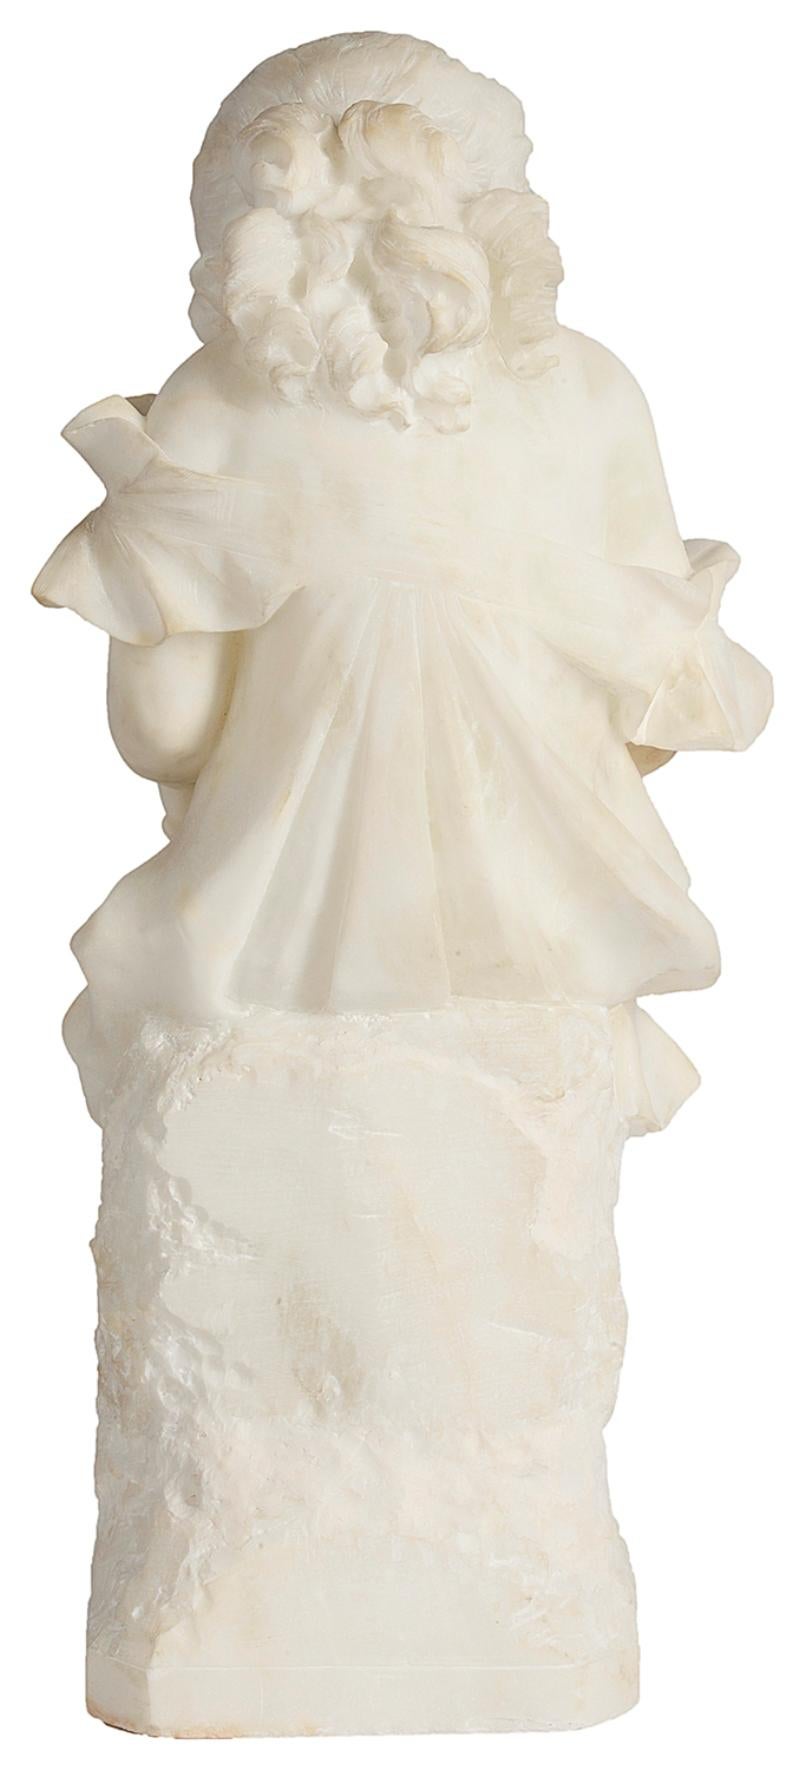 Hand-Carved 19th Century Italian Alabaster Statue of a Young Girl Reading